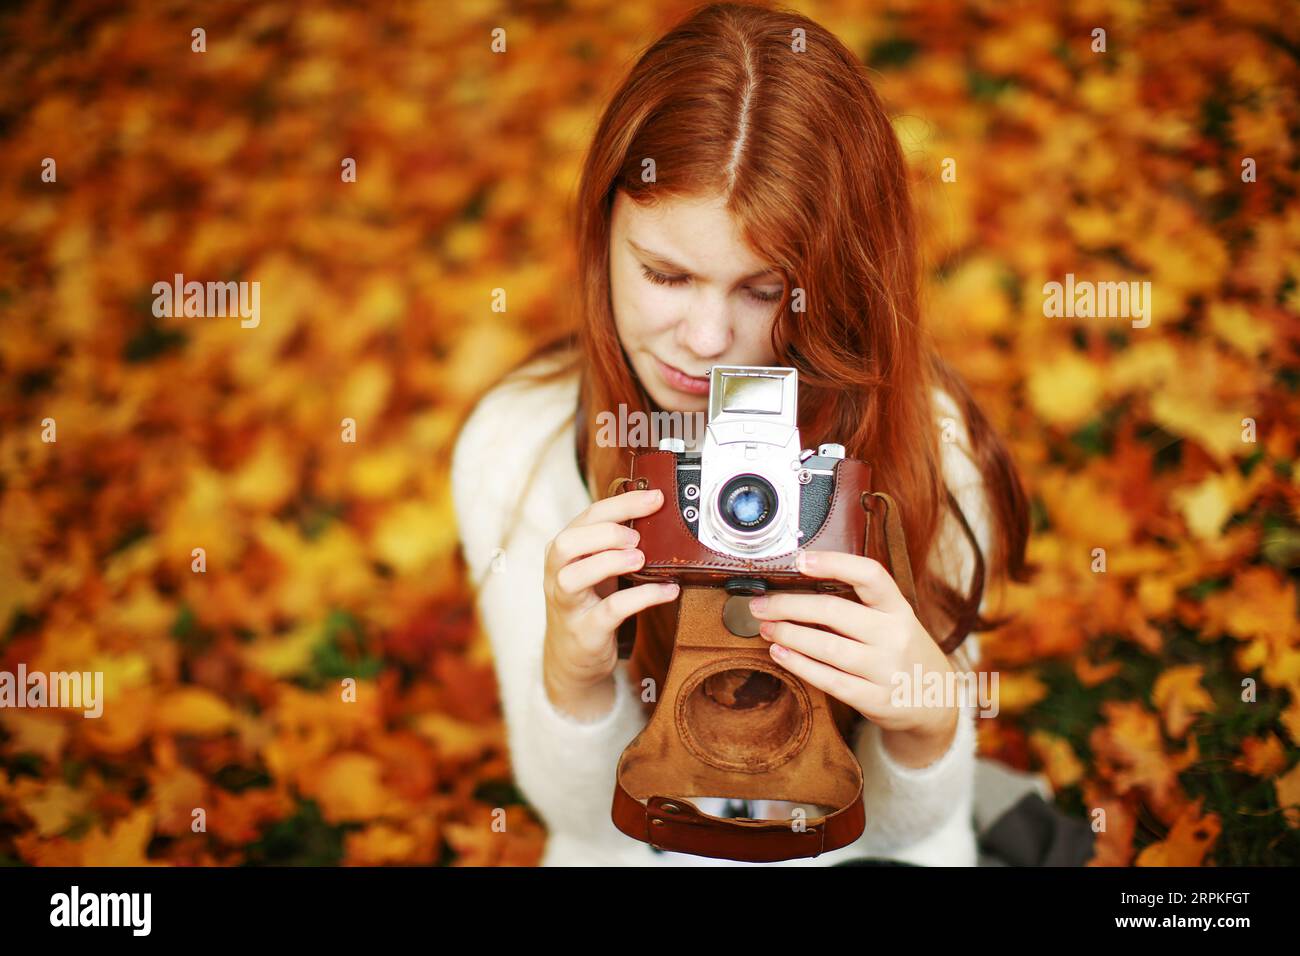 Little red-haired girl with a retro camera in the autumn park. Child photographer. Stock Photo